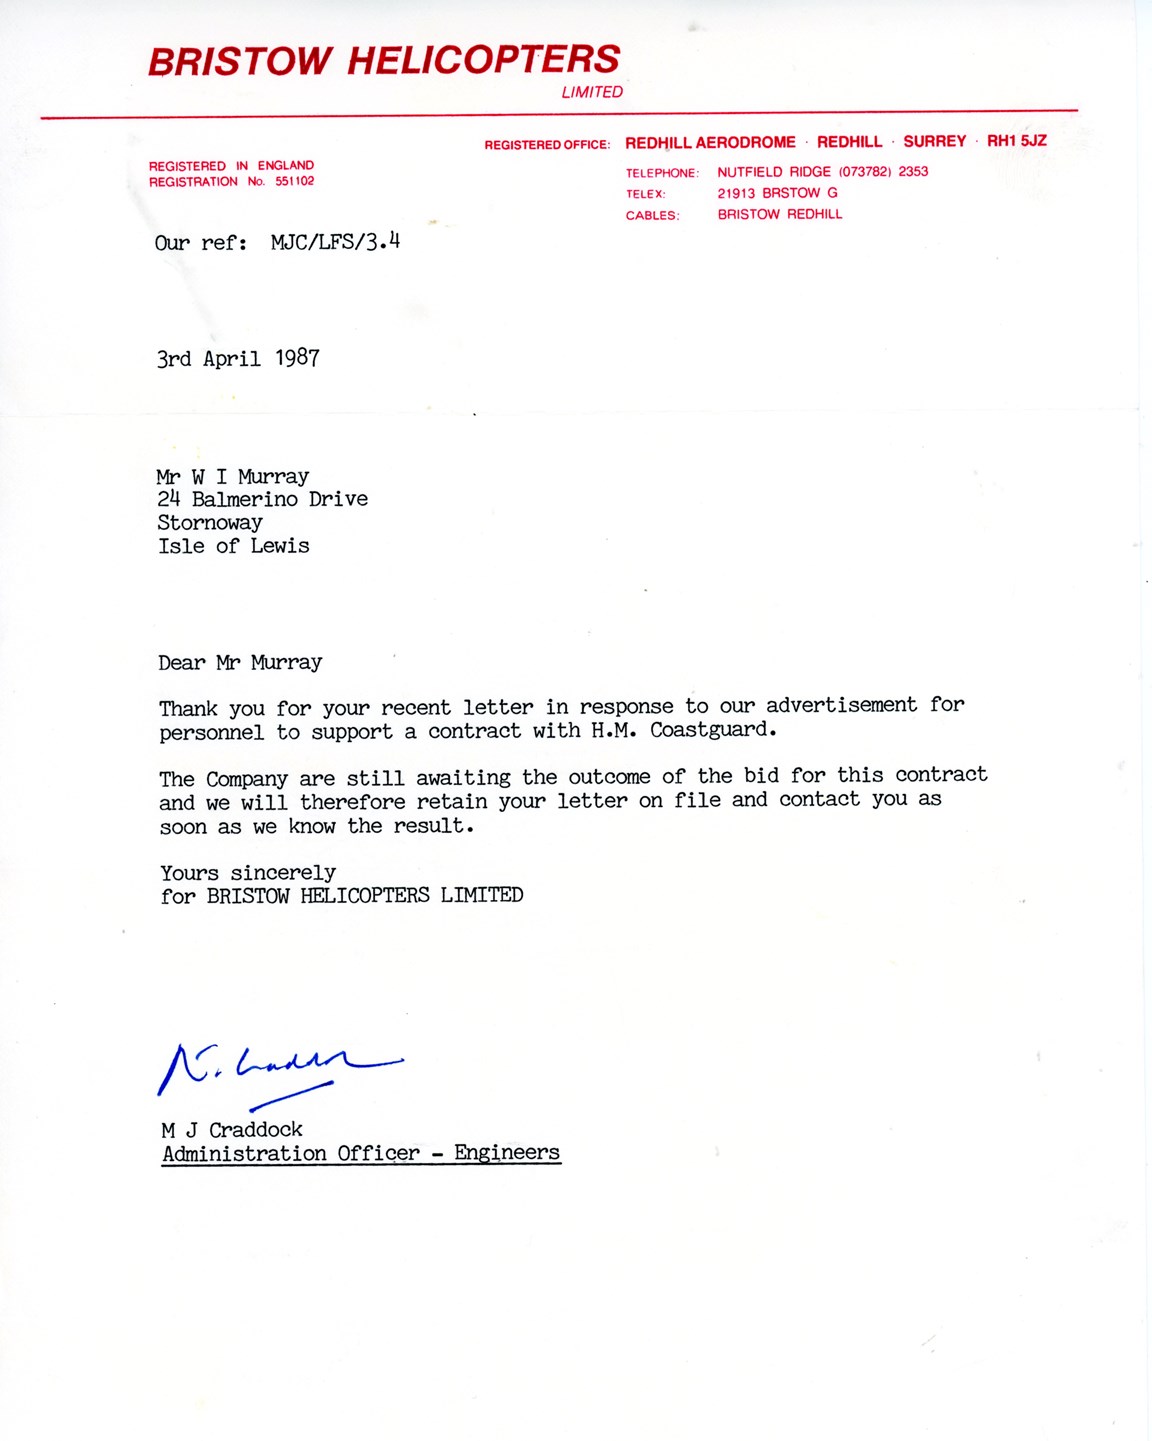 Letter from Bristow Helicopters Ltd., dated 3rd April 1987 to W. I Murray